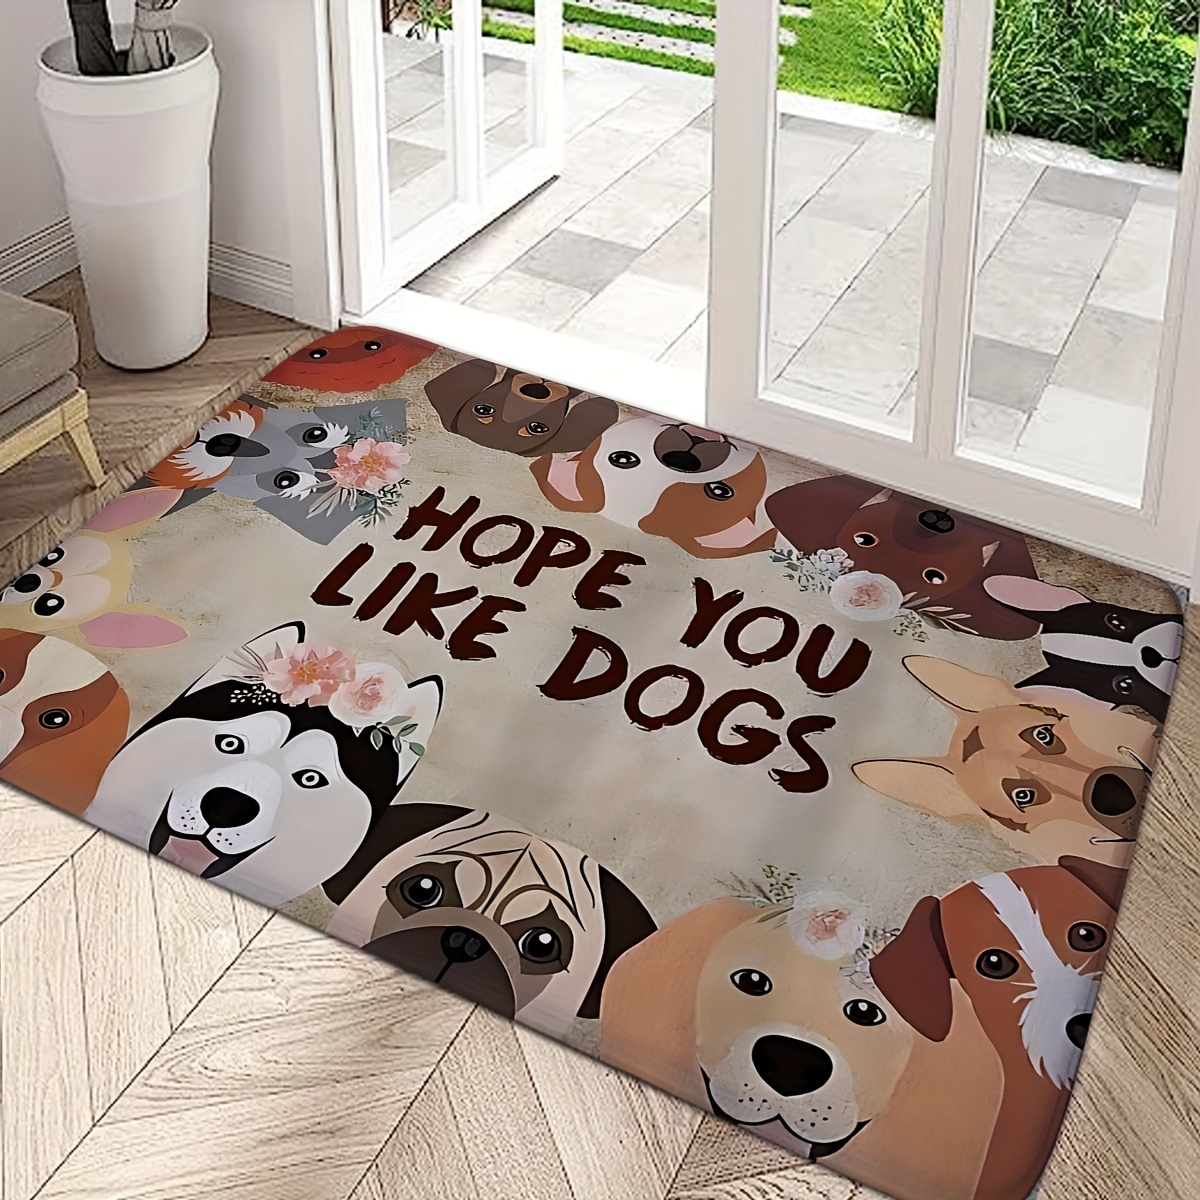 Should Dogs be Allowed on Rugs at Home?